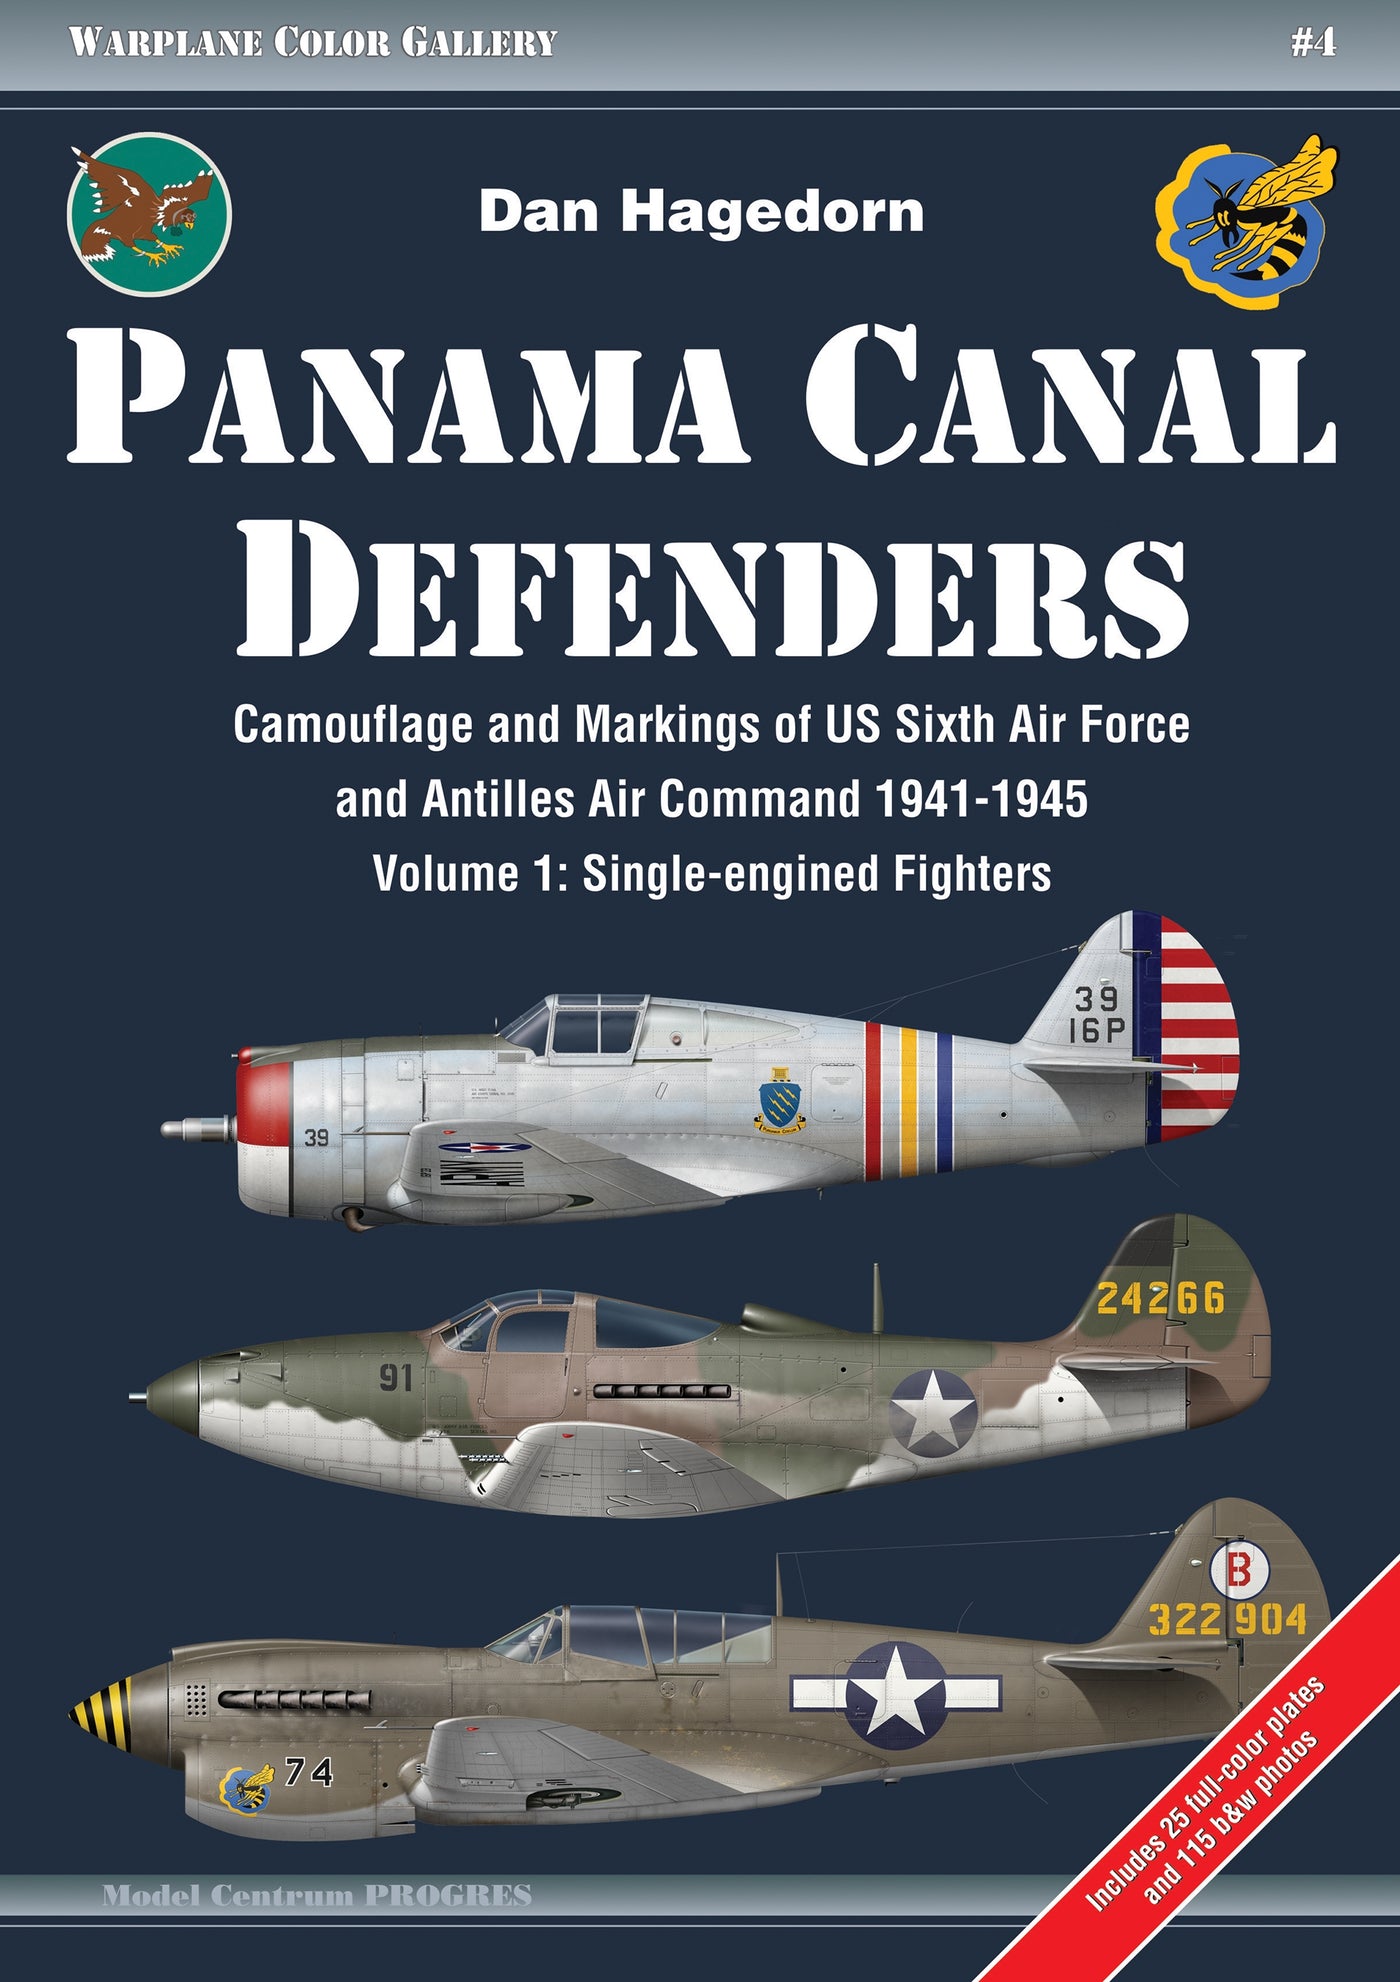 Panama Canal Defenders - Camouflage and Markings of US Sixth Air Force and Antilles Air Command 1941-1945